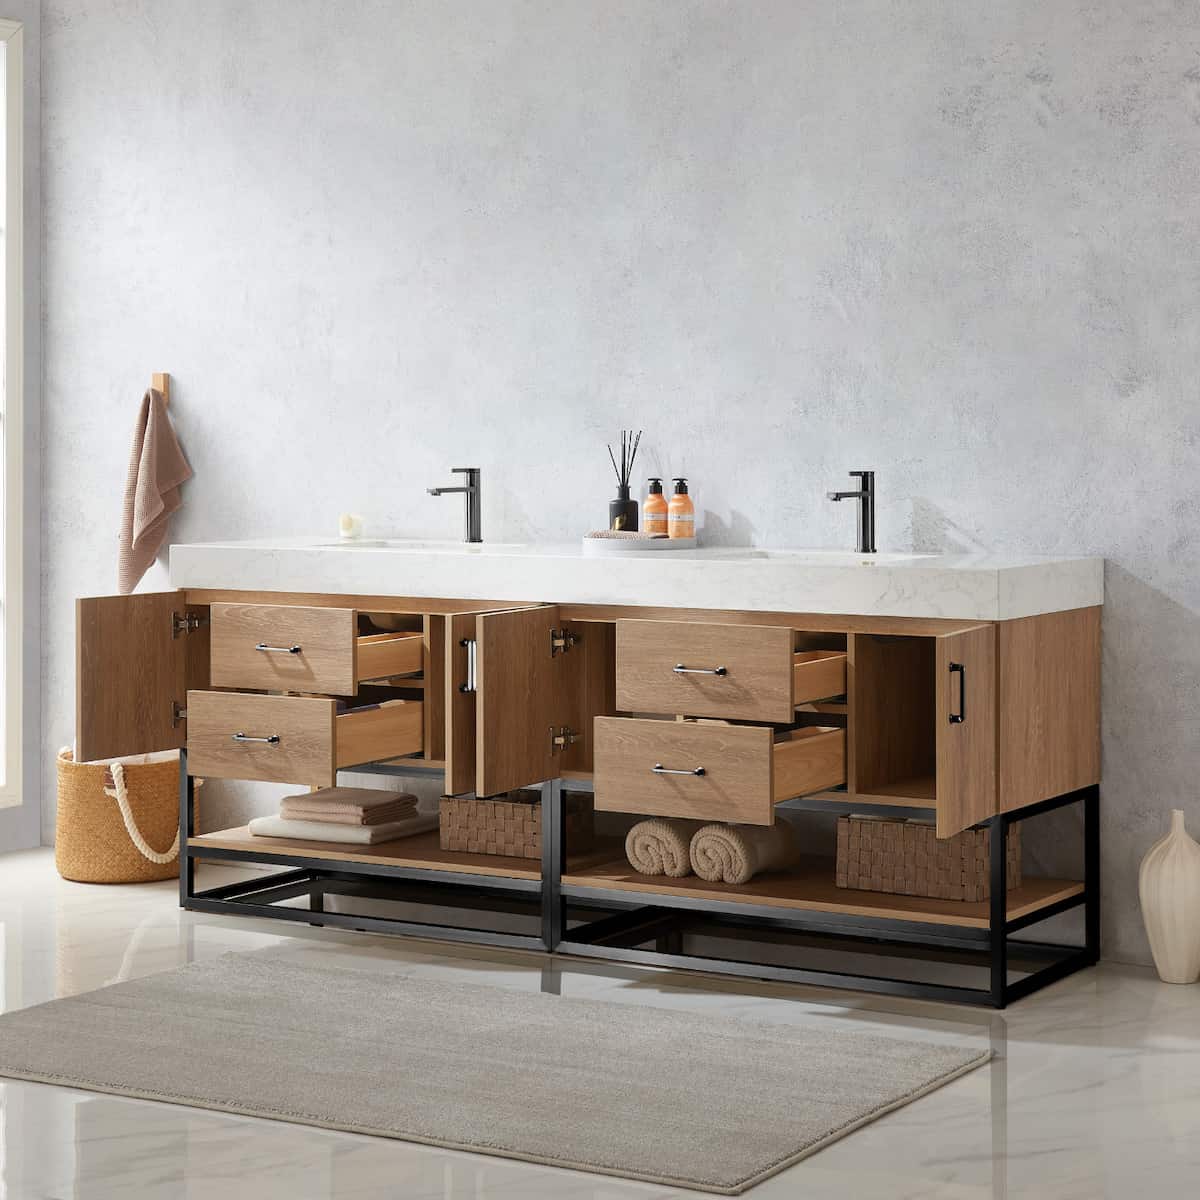 Vinnova Alistair 84 Inch Freestanding Double Vanity in North American Oak and Matte Black Frame with White Grain Stone Countertop Without Mirrors Inside 789084B-NO-GW-NM